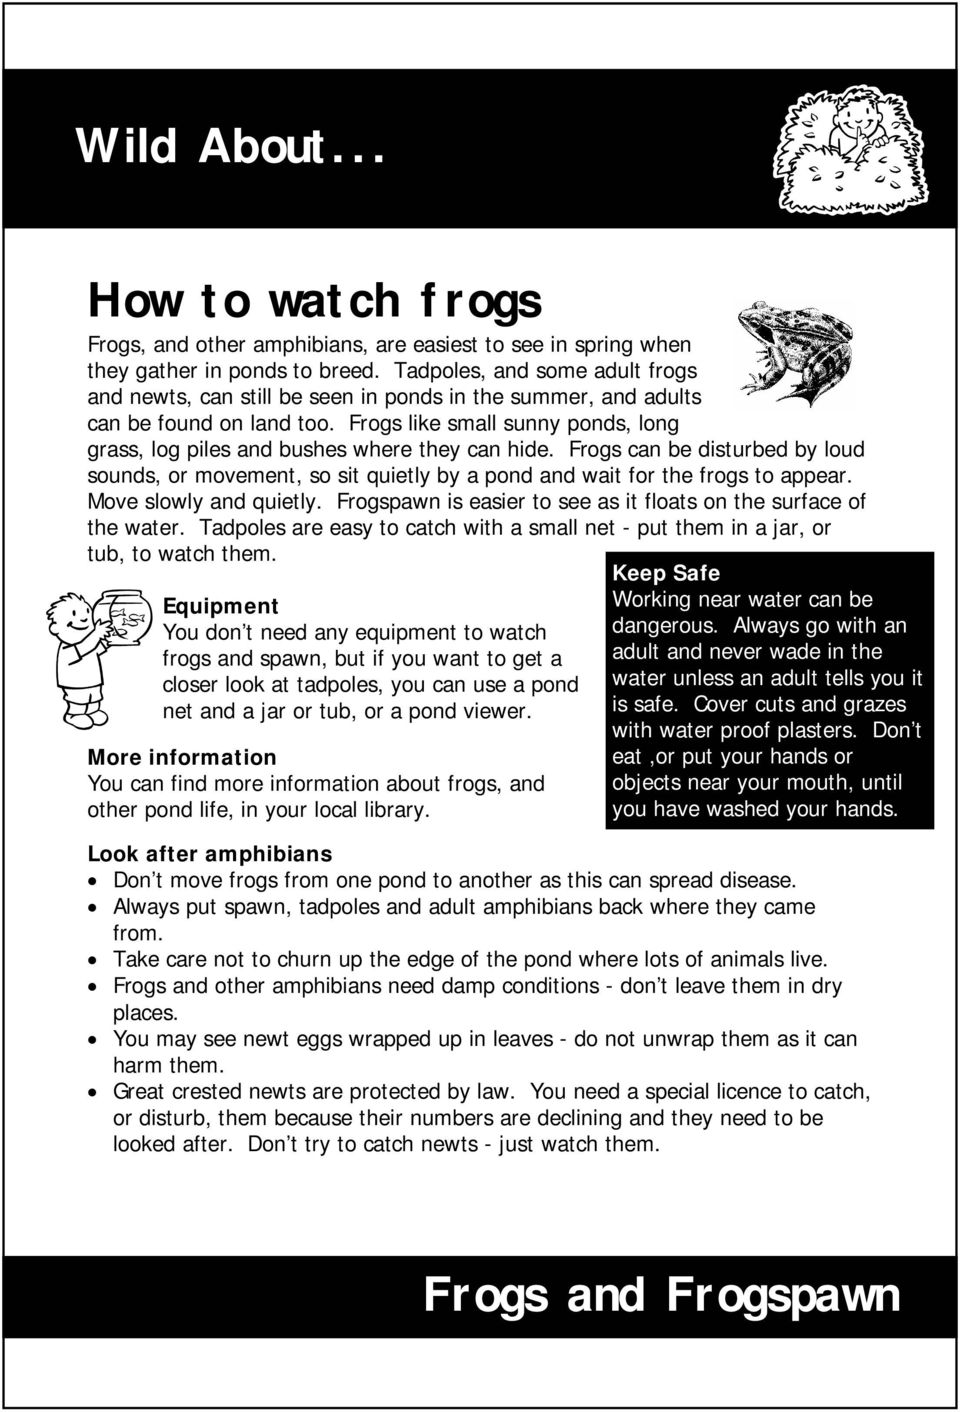 Frogs like small sunny ponds, long grass, log piles and bushes where they can hide. Frogs can be disturbed by loud sounds, or movement, so sit quietly by a pond and wait for the frogs to appear.